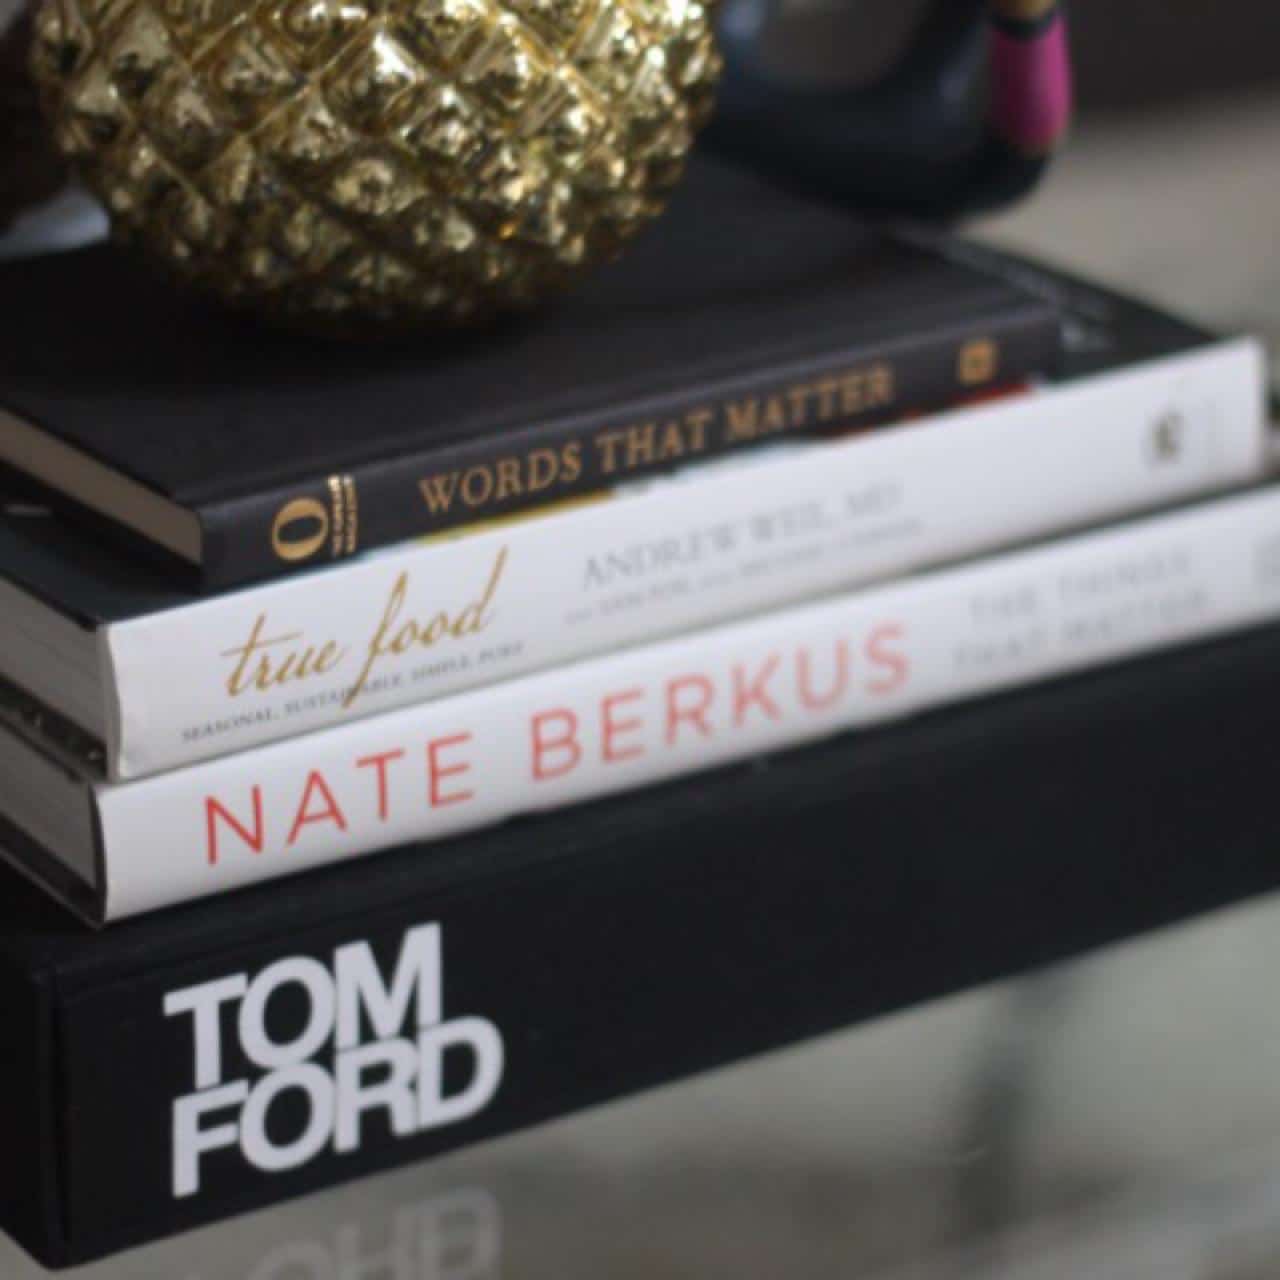 Tom Ford Coffee Table book. Brand new in perfect condition.